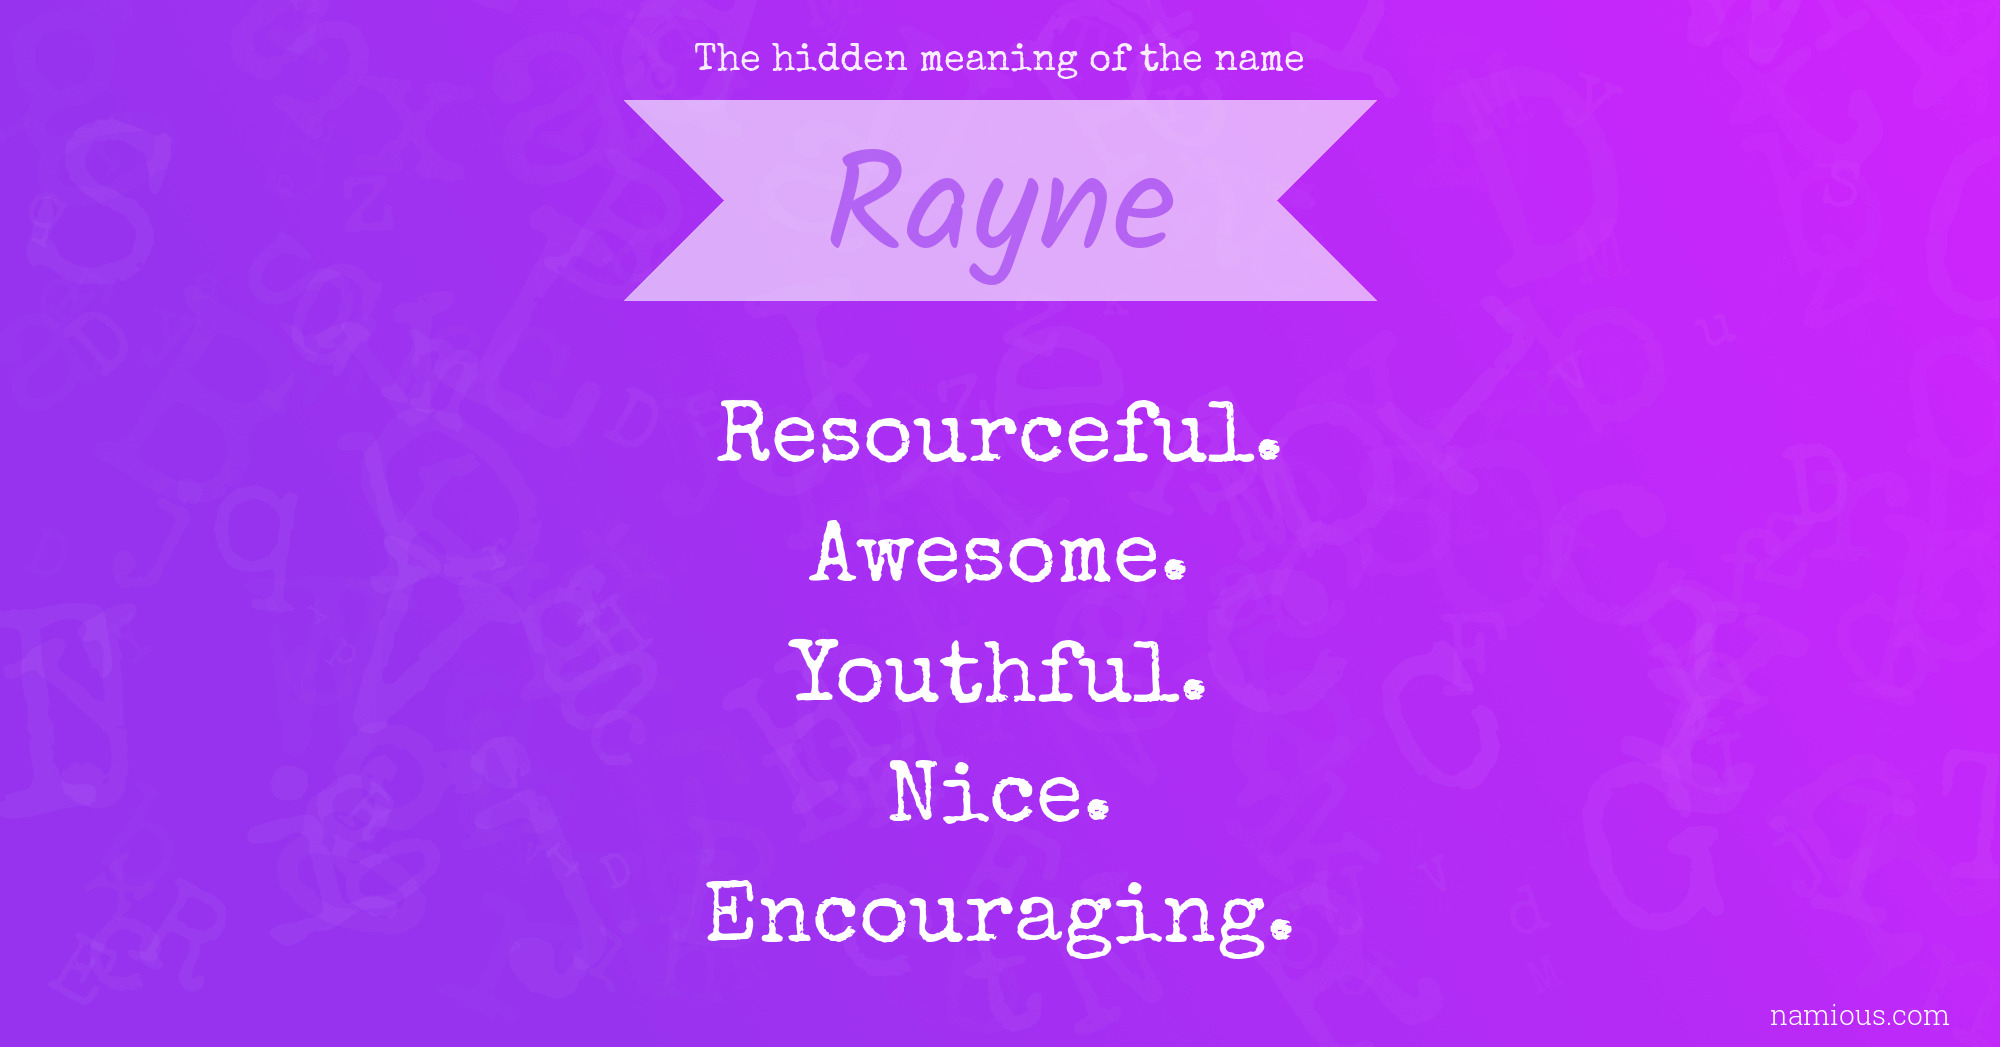 The hidden meaning of the name Rayne